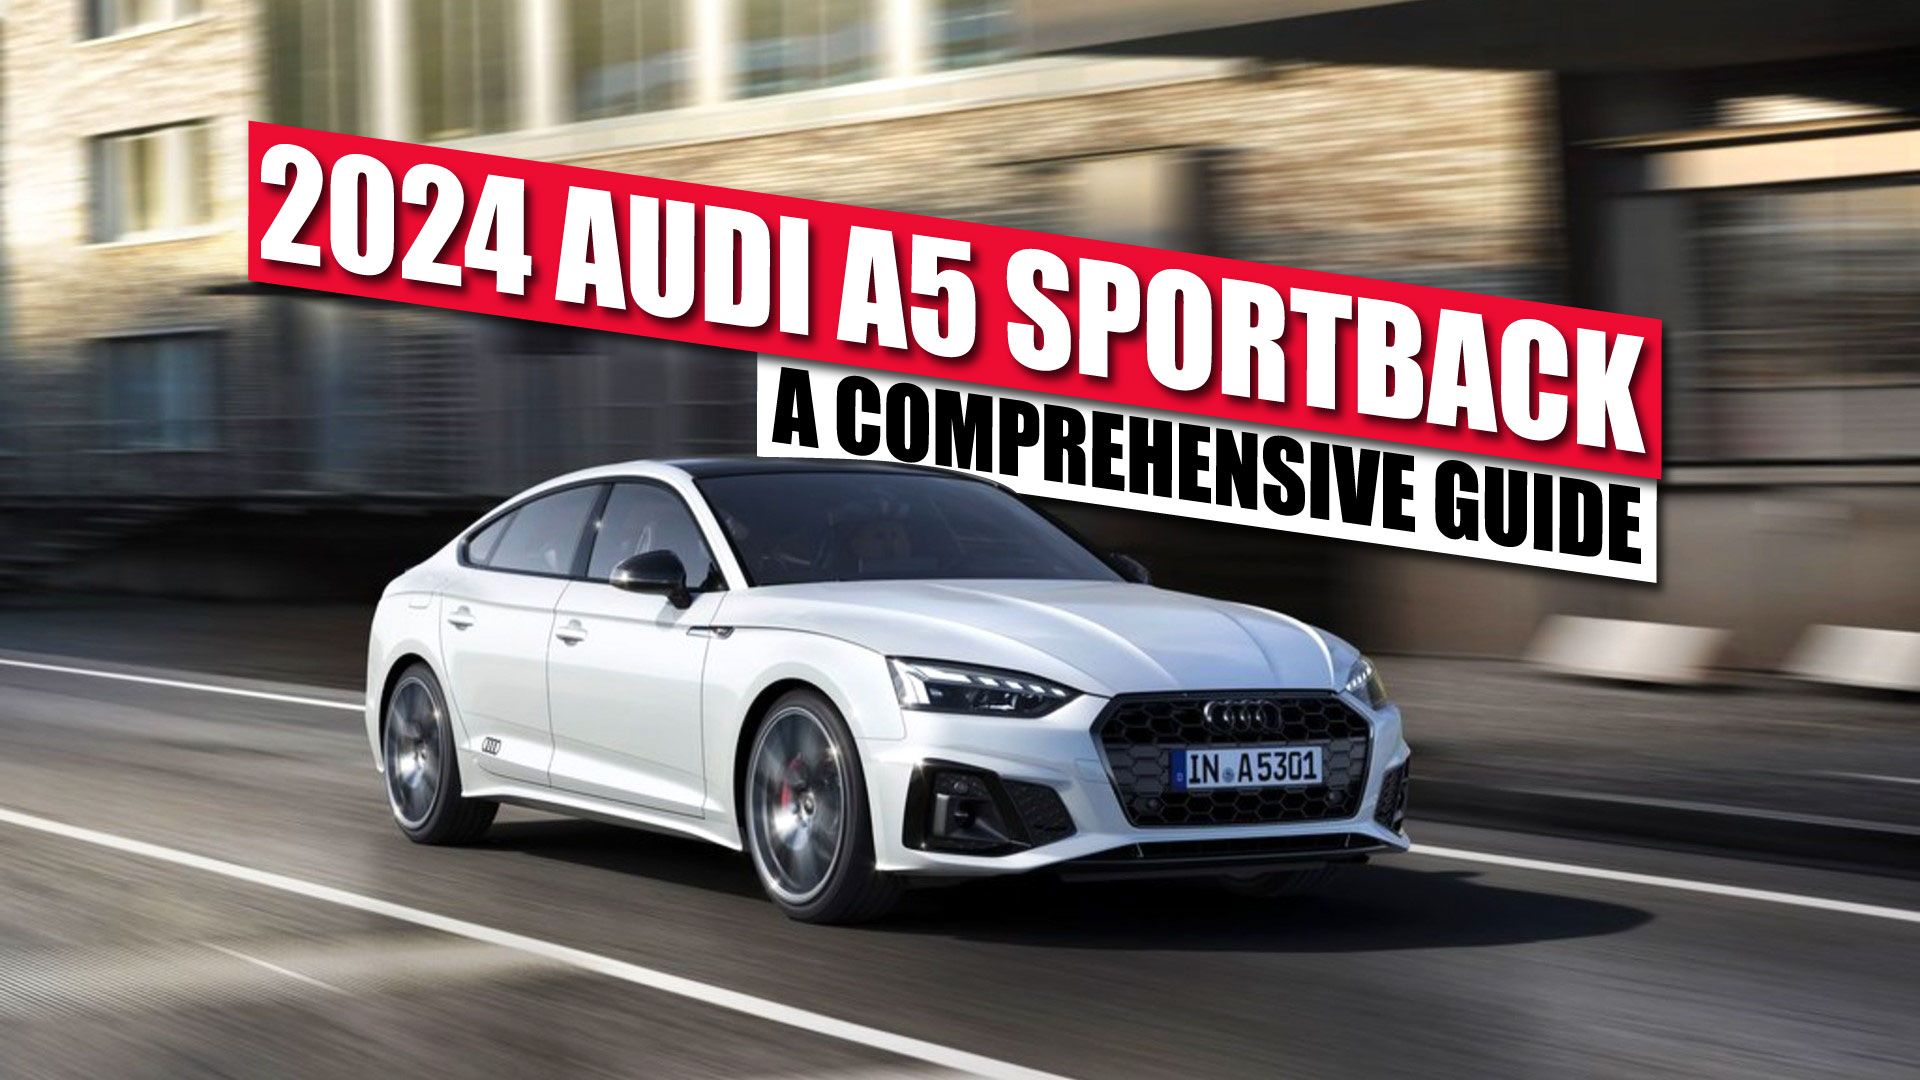 2024 Audi A5 Sportback A Comprehensive Guide On Features, Specs, And